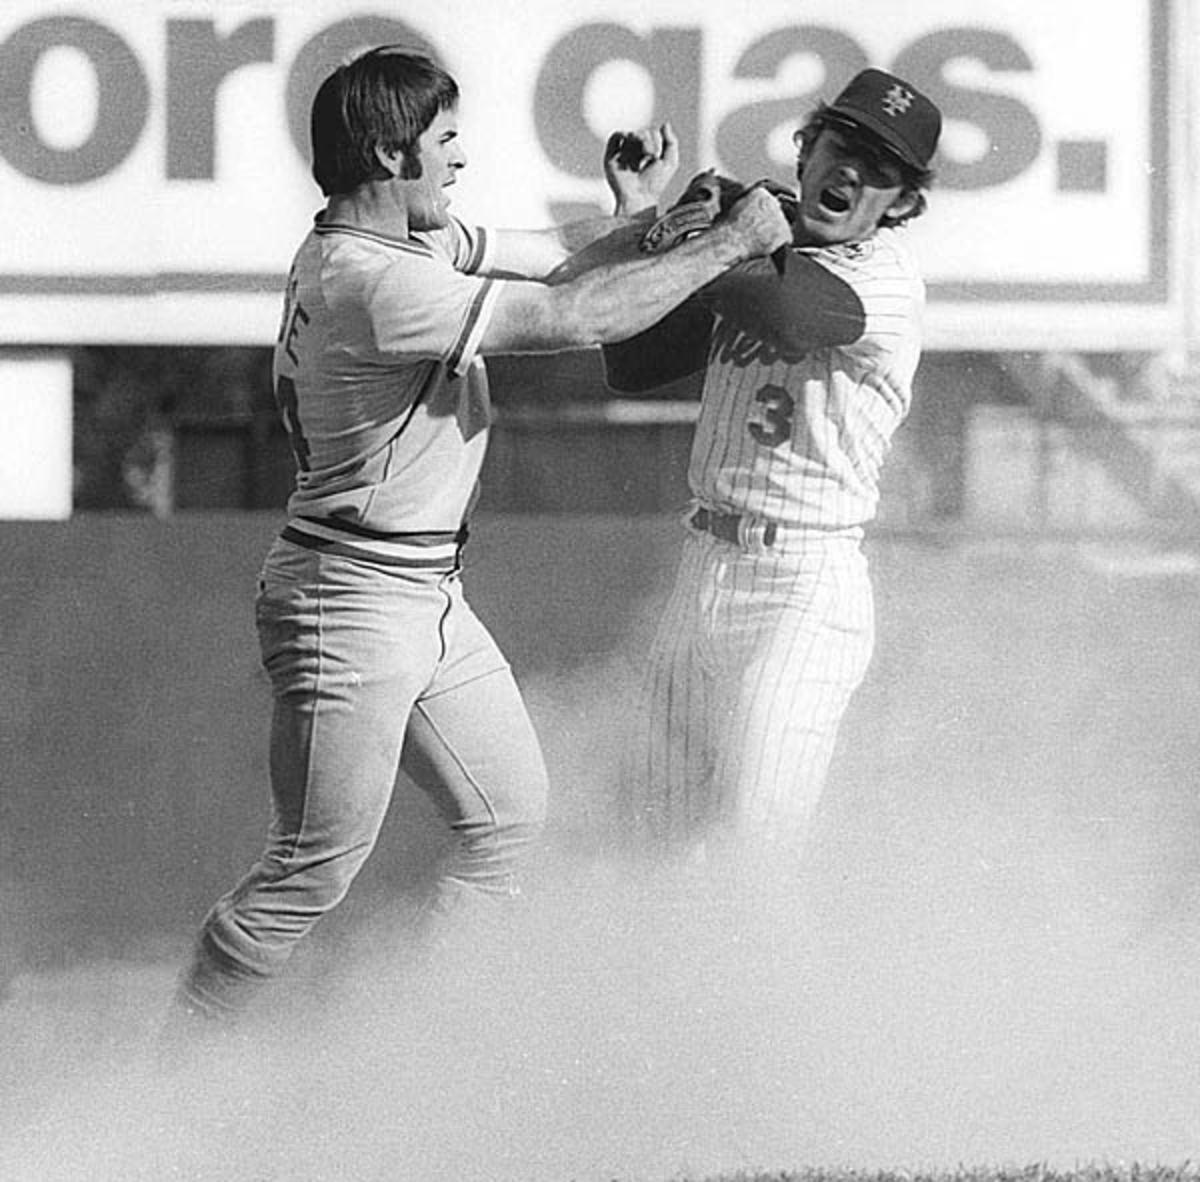 Pete Rose and Bud Harrelson